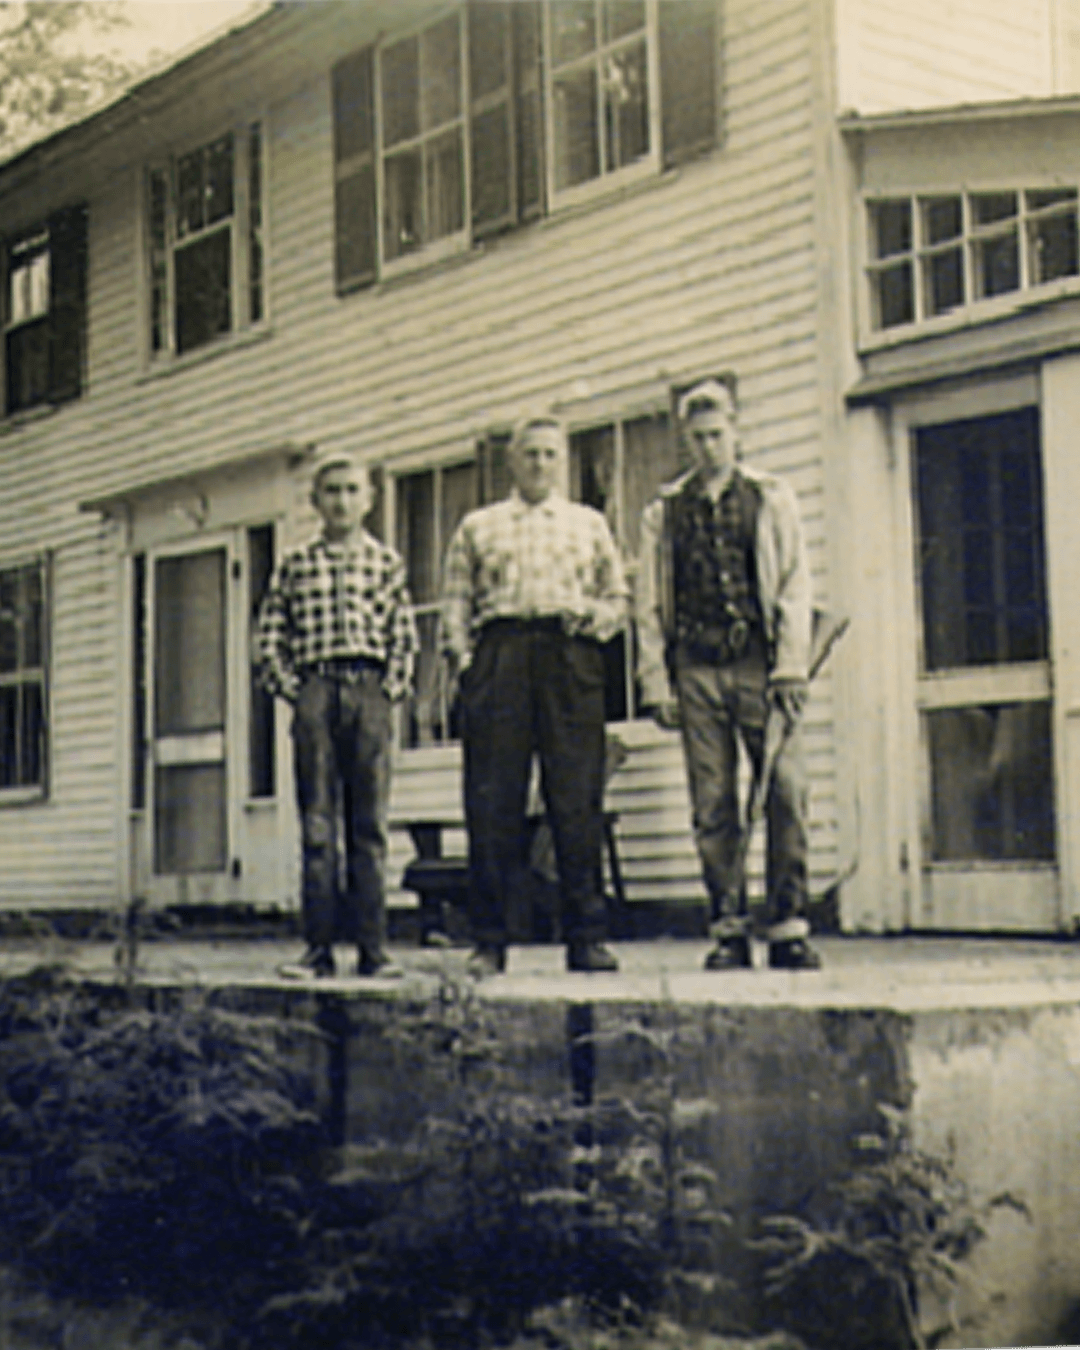 Martin, his brother, and his father